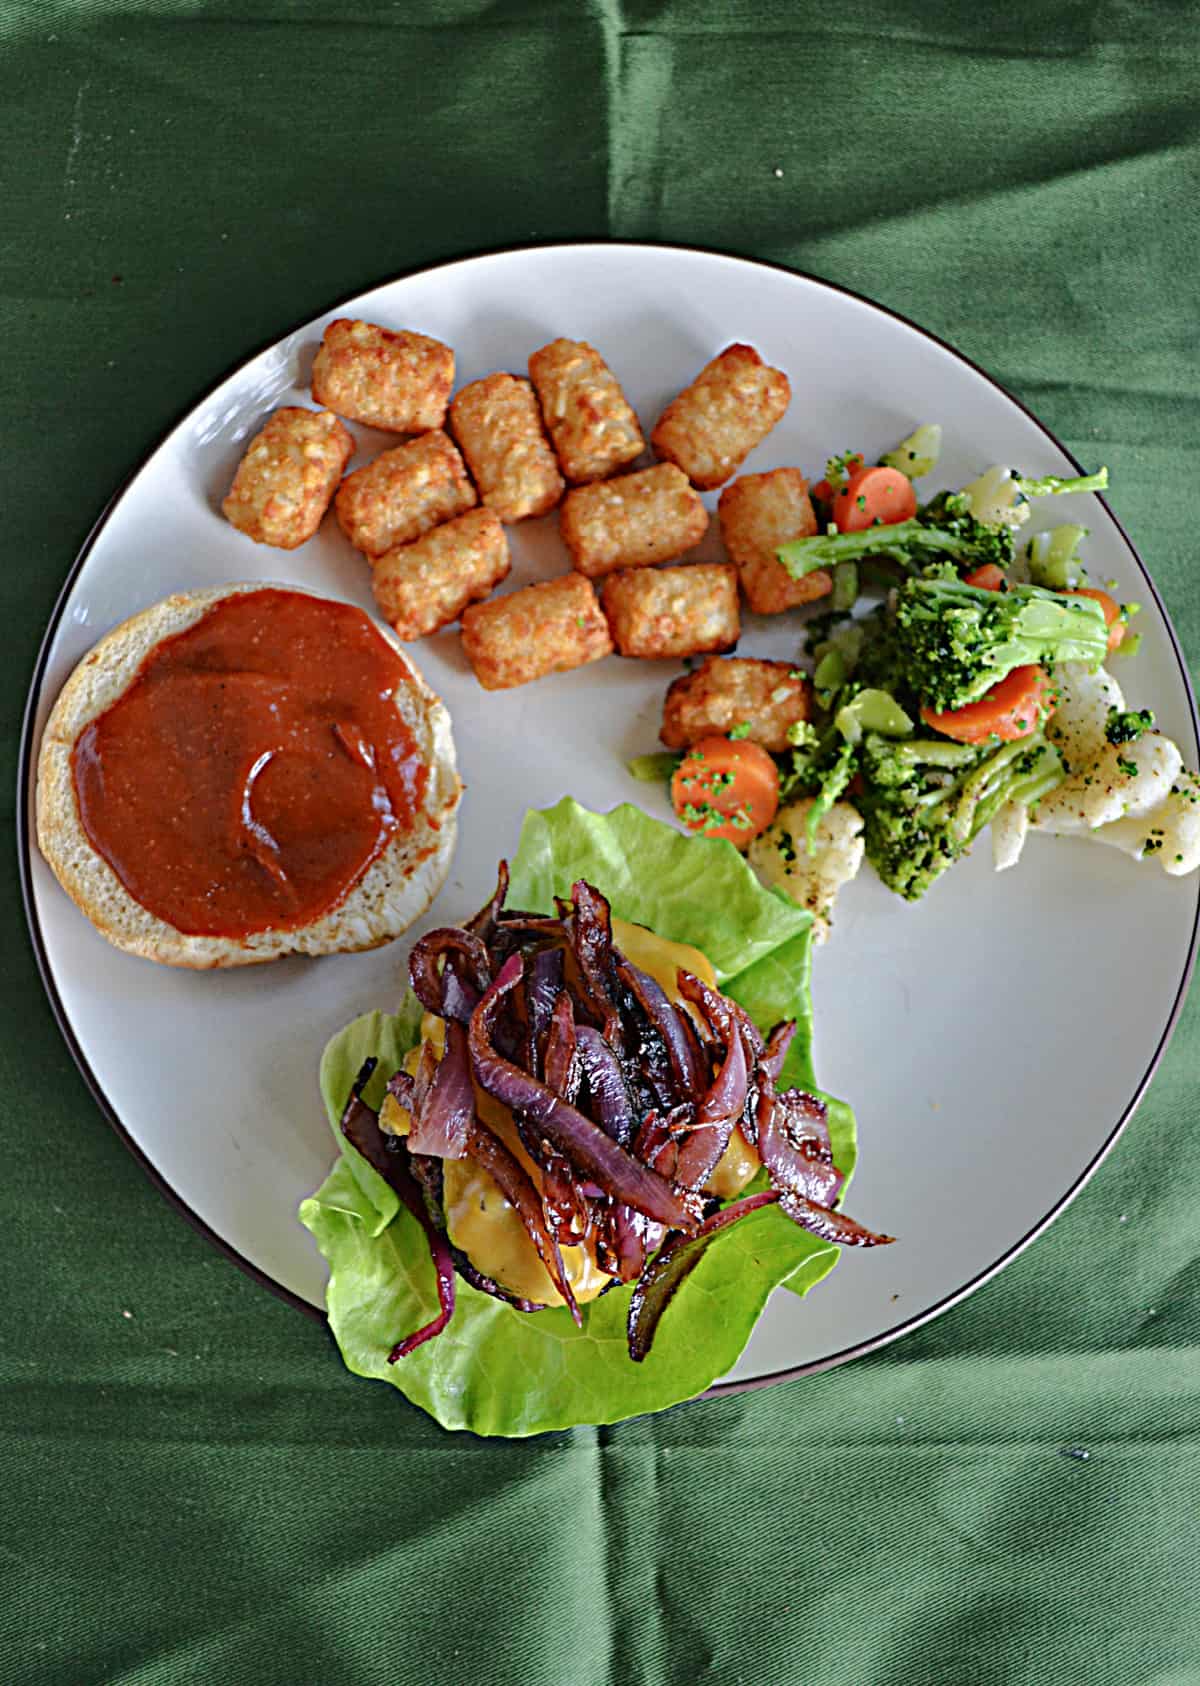 A top view of a burger with caramelized onions on top, a bun with BBQ sauce, tater tots, and mixed vegetables.  